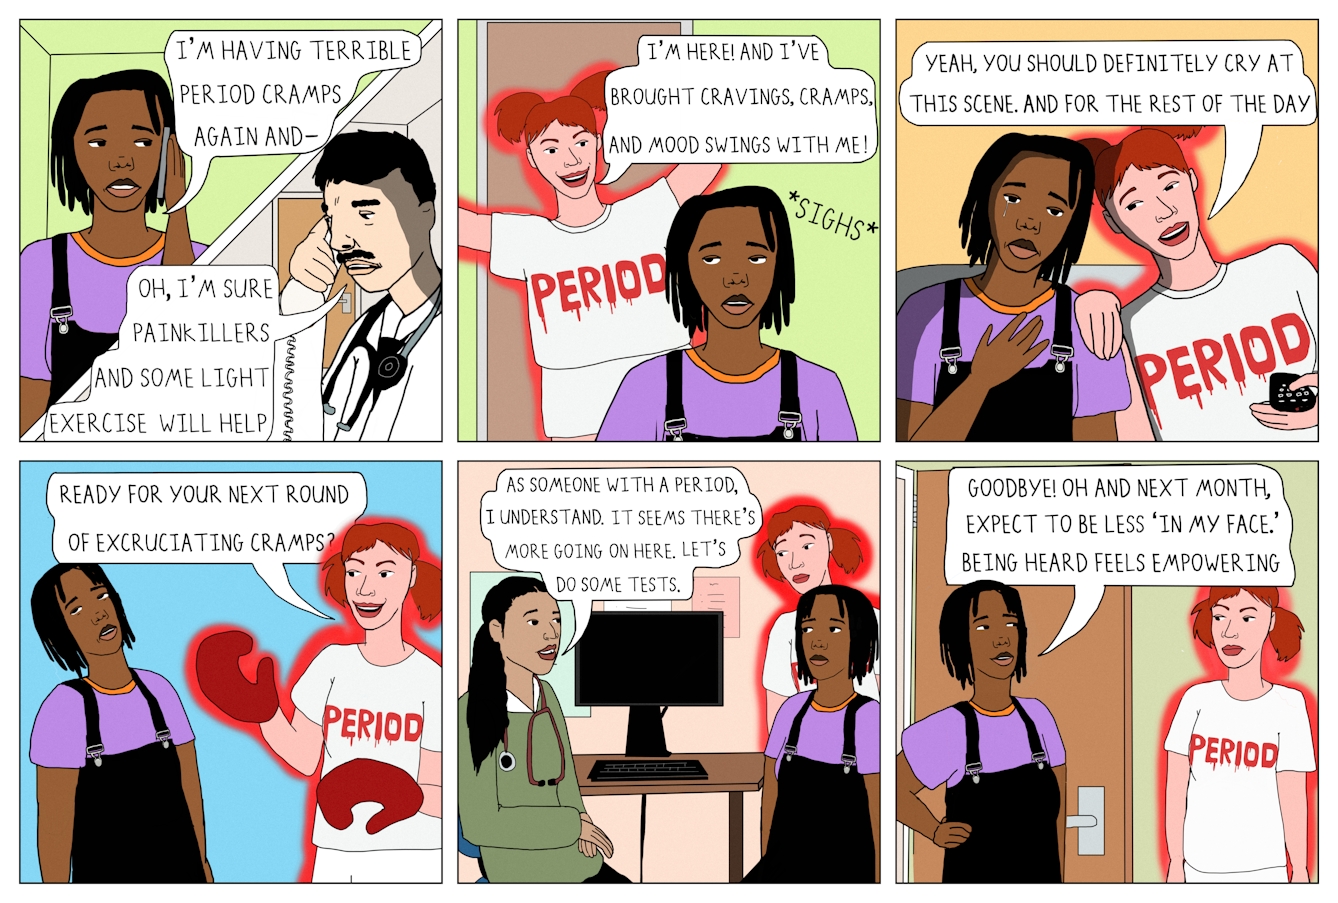 Colourful 6 panel comic. 

Panel one shows a square divided by a thick white line running diagonally. The upper left corner of the square shows a Black woman wearing a purple t-shirt and dungarees holding her mobile phone to her ear. She has short black hair. A speech bubble from her open mouth reads 'I'm having terrible period cramps again and-'. The bottom left section of the square shows a white man in a doctor's coat with a stethoscope around his neck. He has black hair and a moustache. A speech bubble reads 'Oh, I'm sure painkillers and some light exercise will help.'

Panel two shows the same woman in the frame. Behind her there is a white woman with red hair who has appeared in the open doorway. She is wearing a white t-shirt which reads 'Period' in red lettering with a blood effect. Her body is outlined in a red glow. A speech bubble from her reads 'I'm here! And I've brought cravings, cramps, and mood swings with me!' 

Panel three shows the same two characters. The woman is crying and 'Period' has her hand on her shoulder and a TV remote in her other hand. A speech bubble from 'Period' reads 'Yeah, you should definitely cry at this scene. And for the rest of the day.'

Panel four shows the same characters. 'Period' is wearing red boxing gloves and a speech bubble from her mouth reads 'Ready for your next round of excruciating cramps?'

Panel five shows the two characters in a doctor's office, sat in front of a computer. 'Period' is standing behind the main character who is speaking to a doctor. The doctor is a woman and is wearing a green jumper with a stethoscope around her neck. A speech bubble from the doctor reads 'As someone with a period, I understand. It seems there's more going on here. Let's do some tests.'

Panel six shows the main character standing in front of her door, with 'Period' outside the door. A speech bubble from the main character reads 'Goodbye! Oh and next month, expect to be less 'in my face'. Being heard feels empowering.'